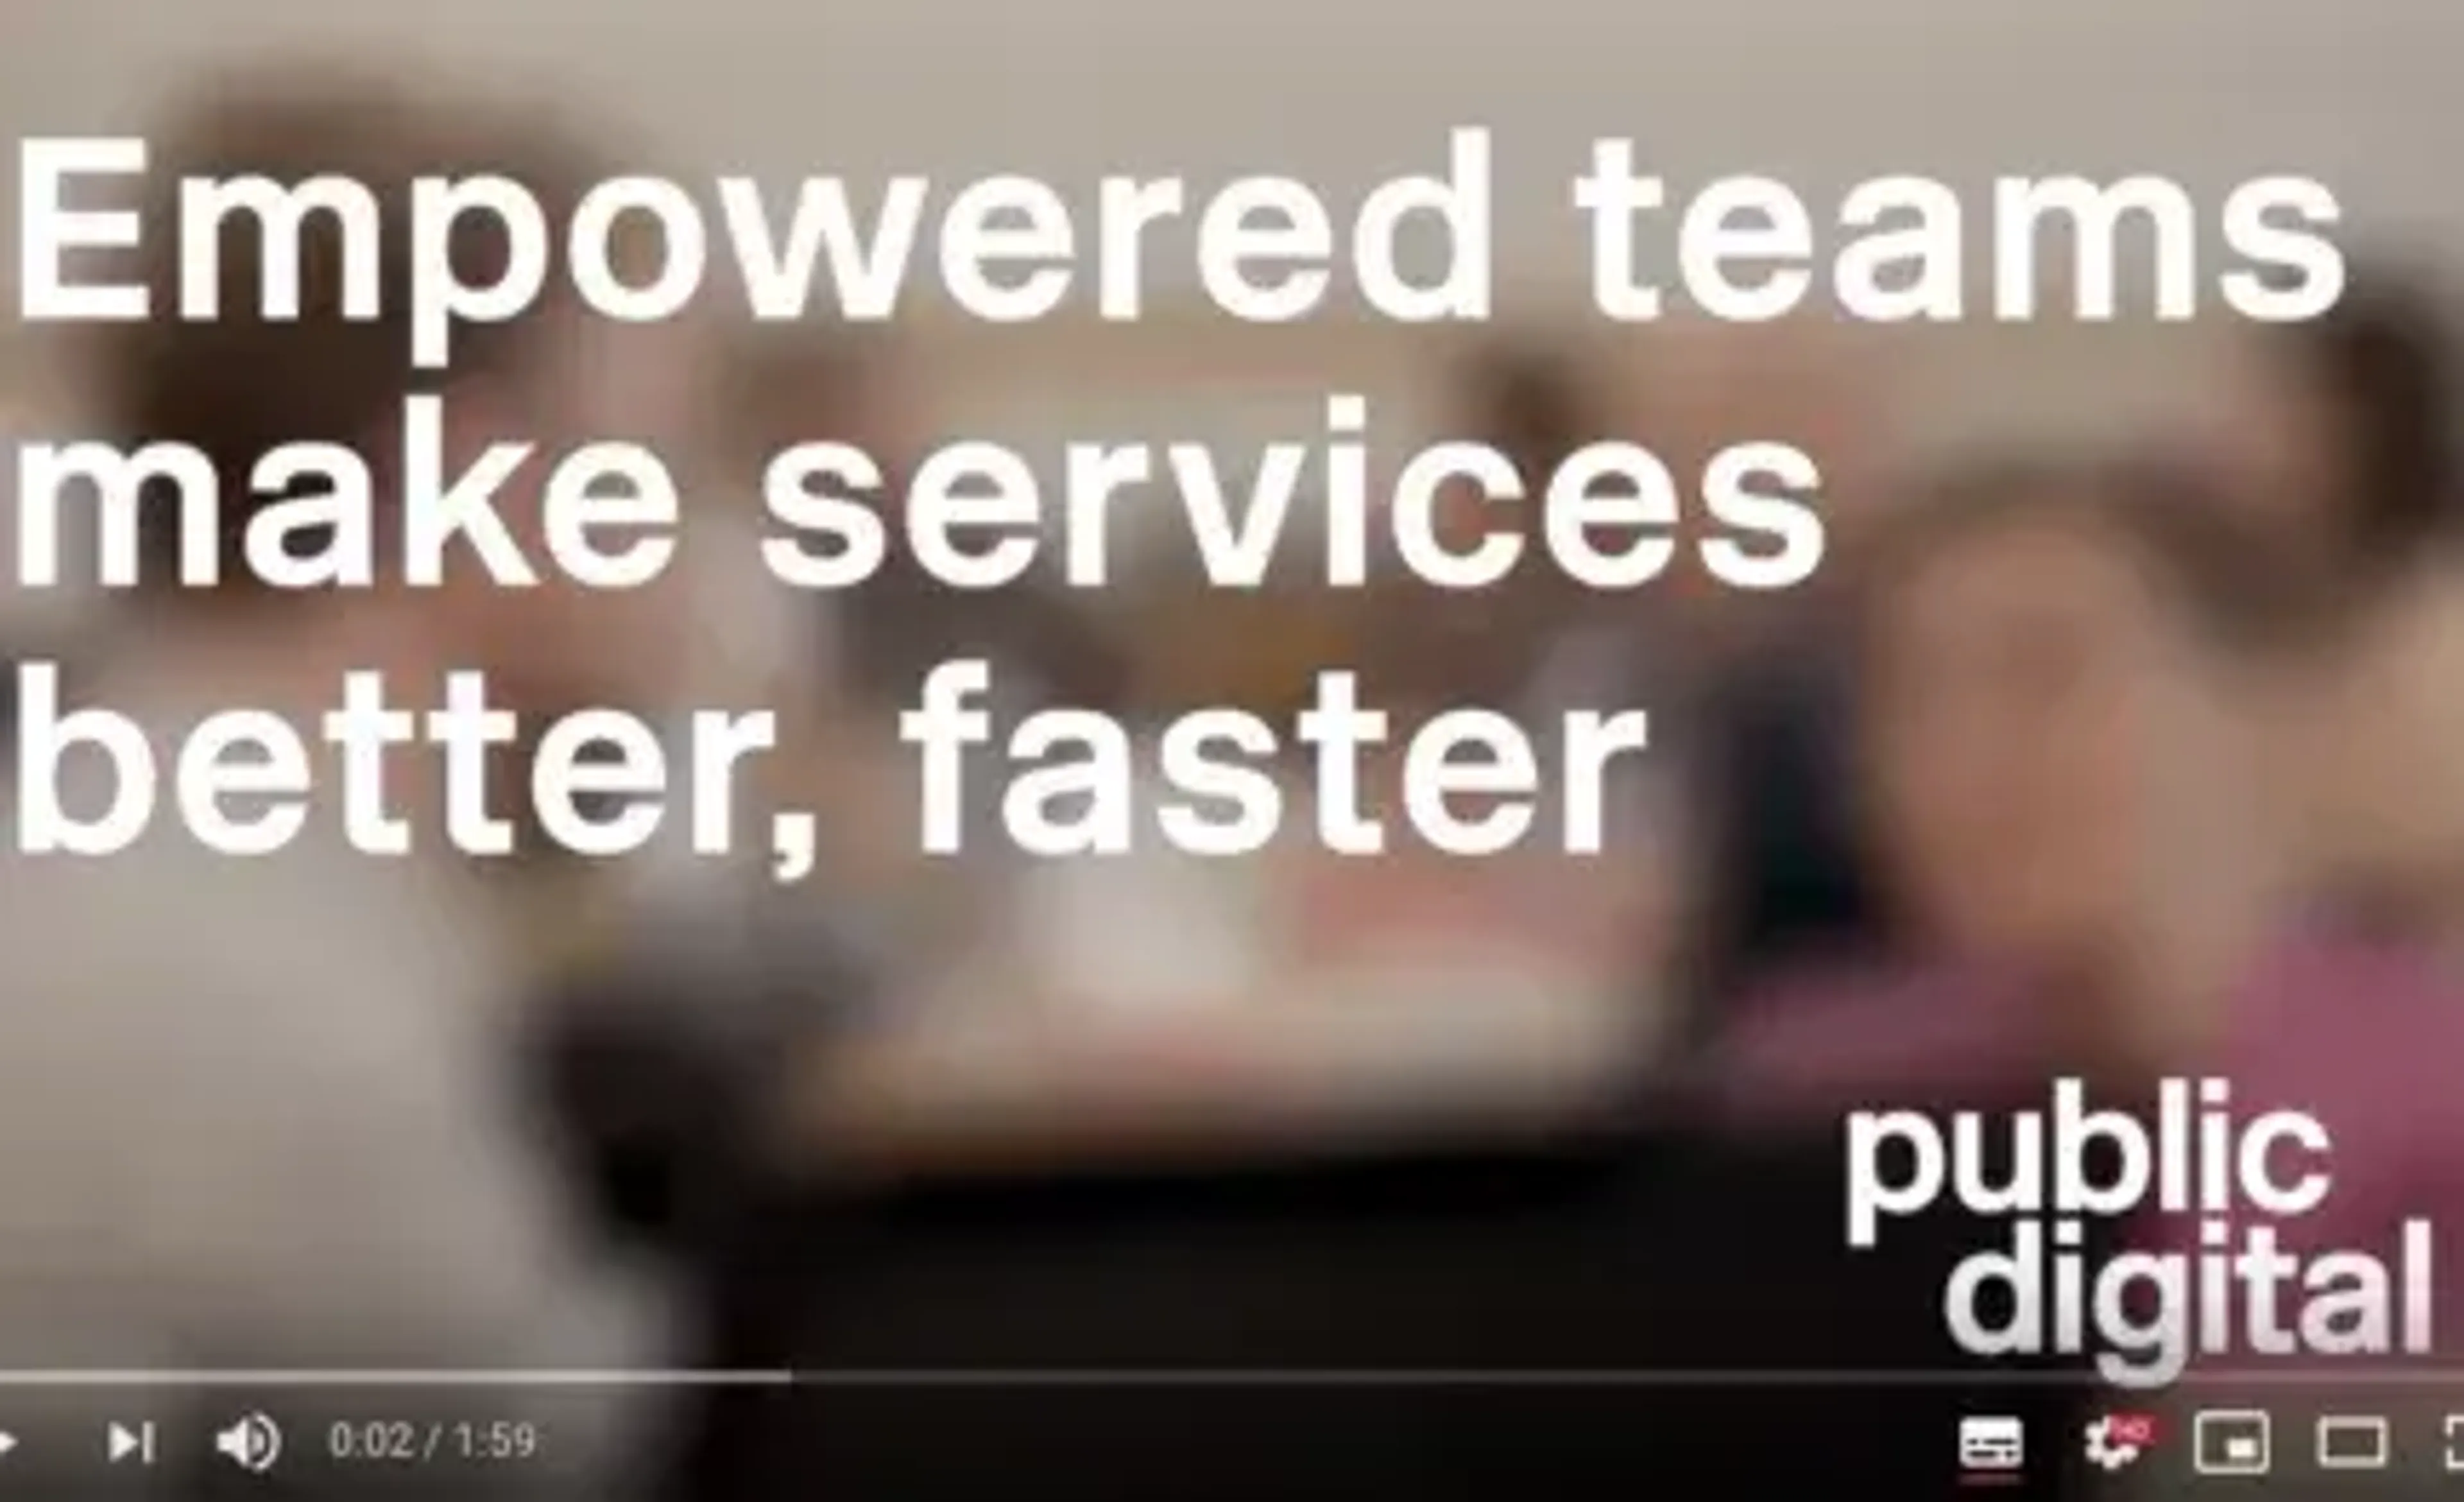 Empowered teams make services faster